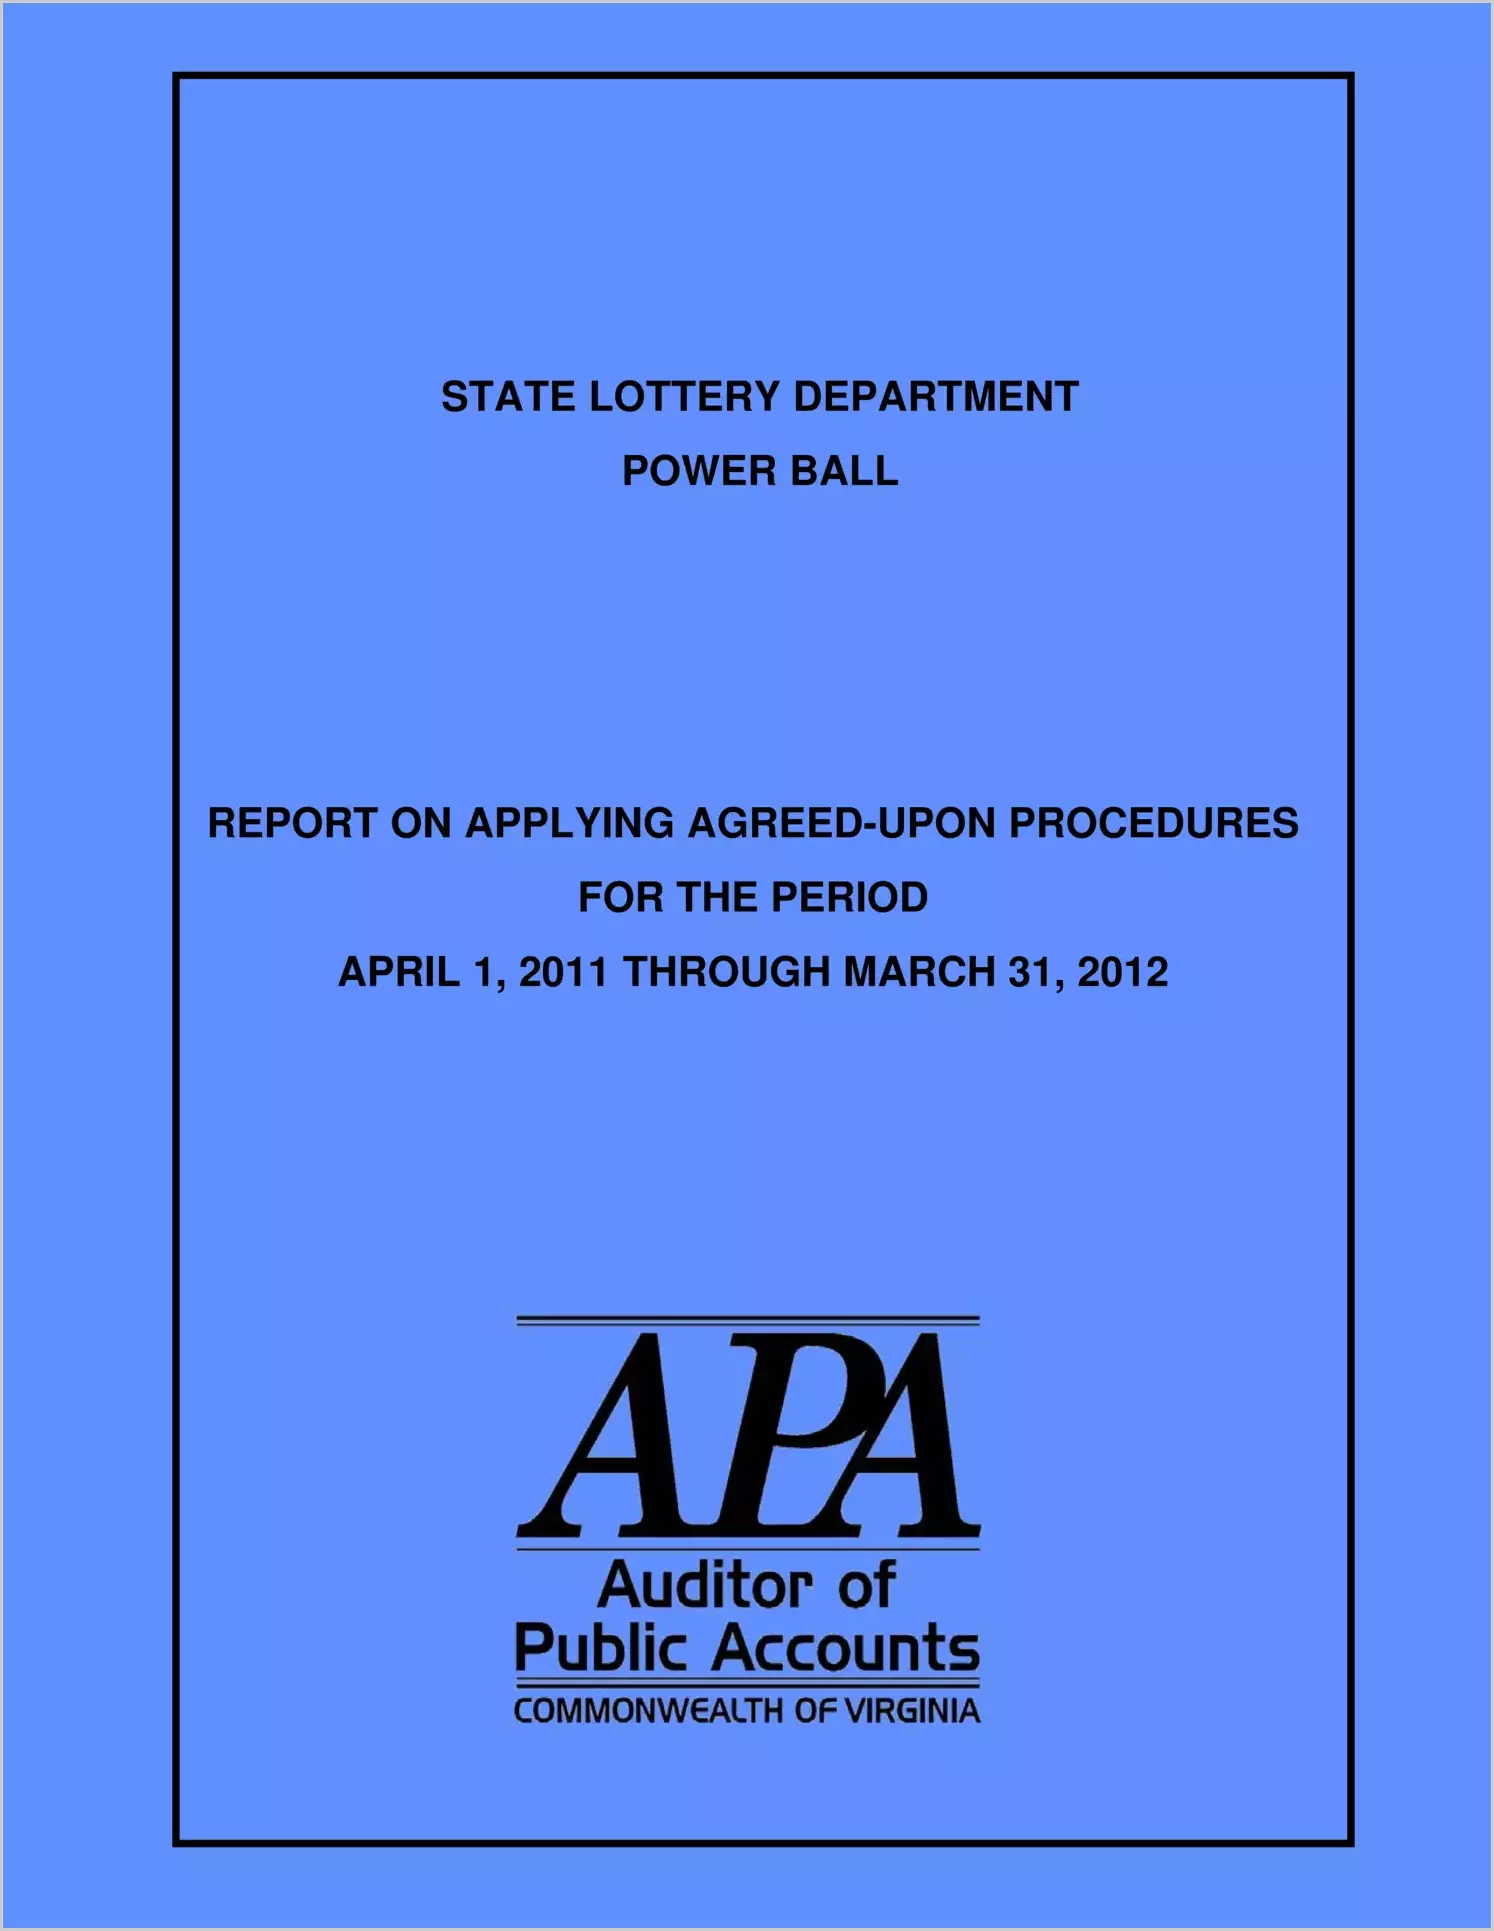 State Lottery Department Power Ball report on Applying Agreed-Upon Procedures for the period April 1, 2011 through March 31, 2012